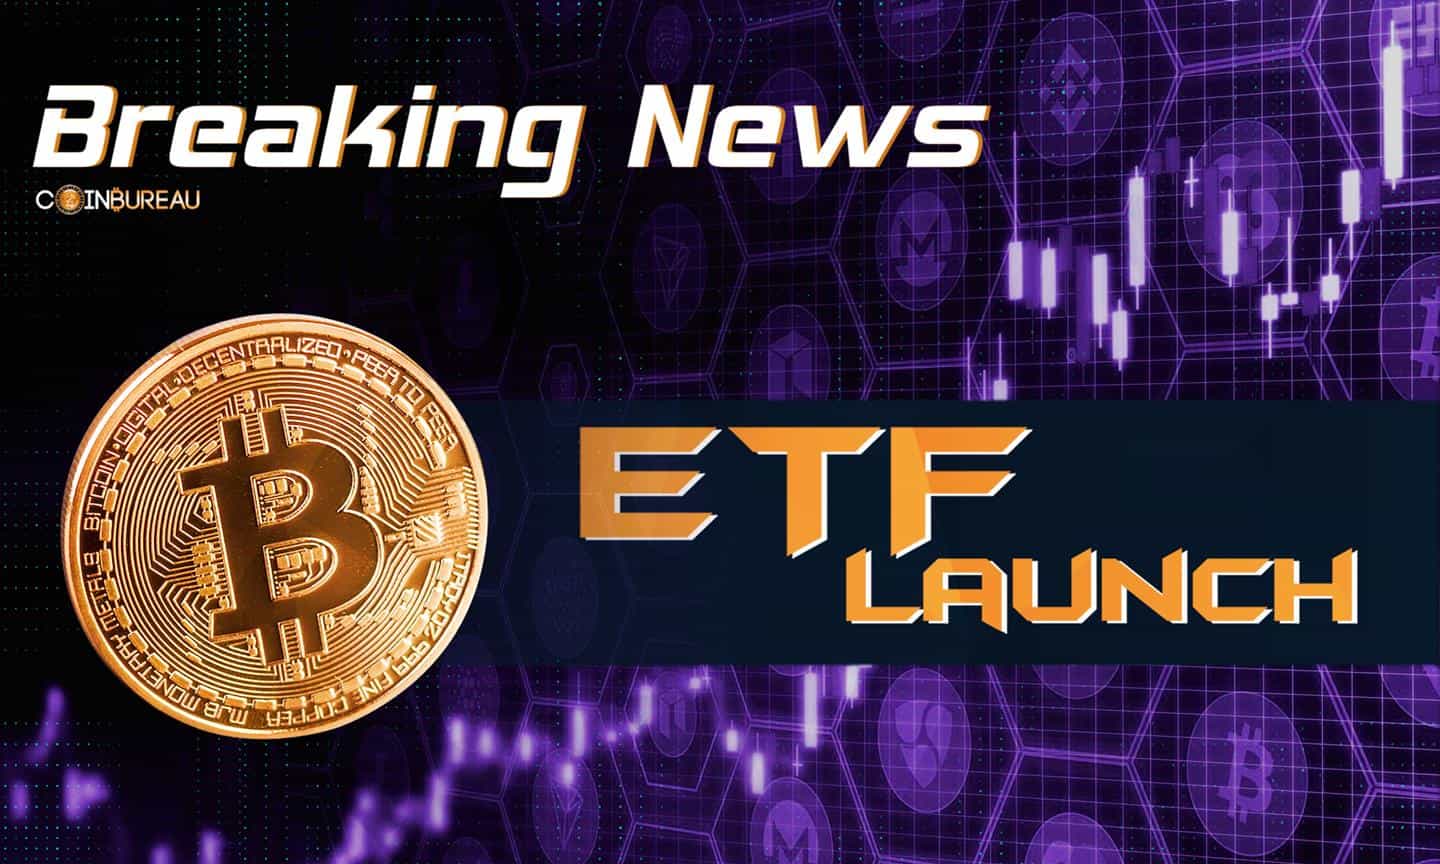 Buy The Rumor, Sell The News? Crypto Markets Eagerly Await Bitcoin ETF Launch